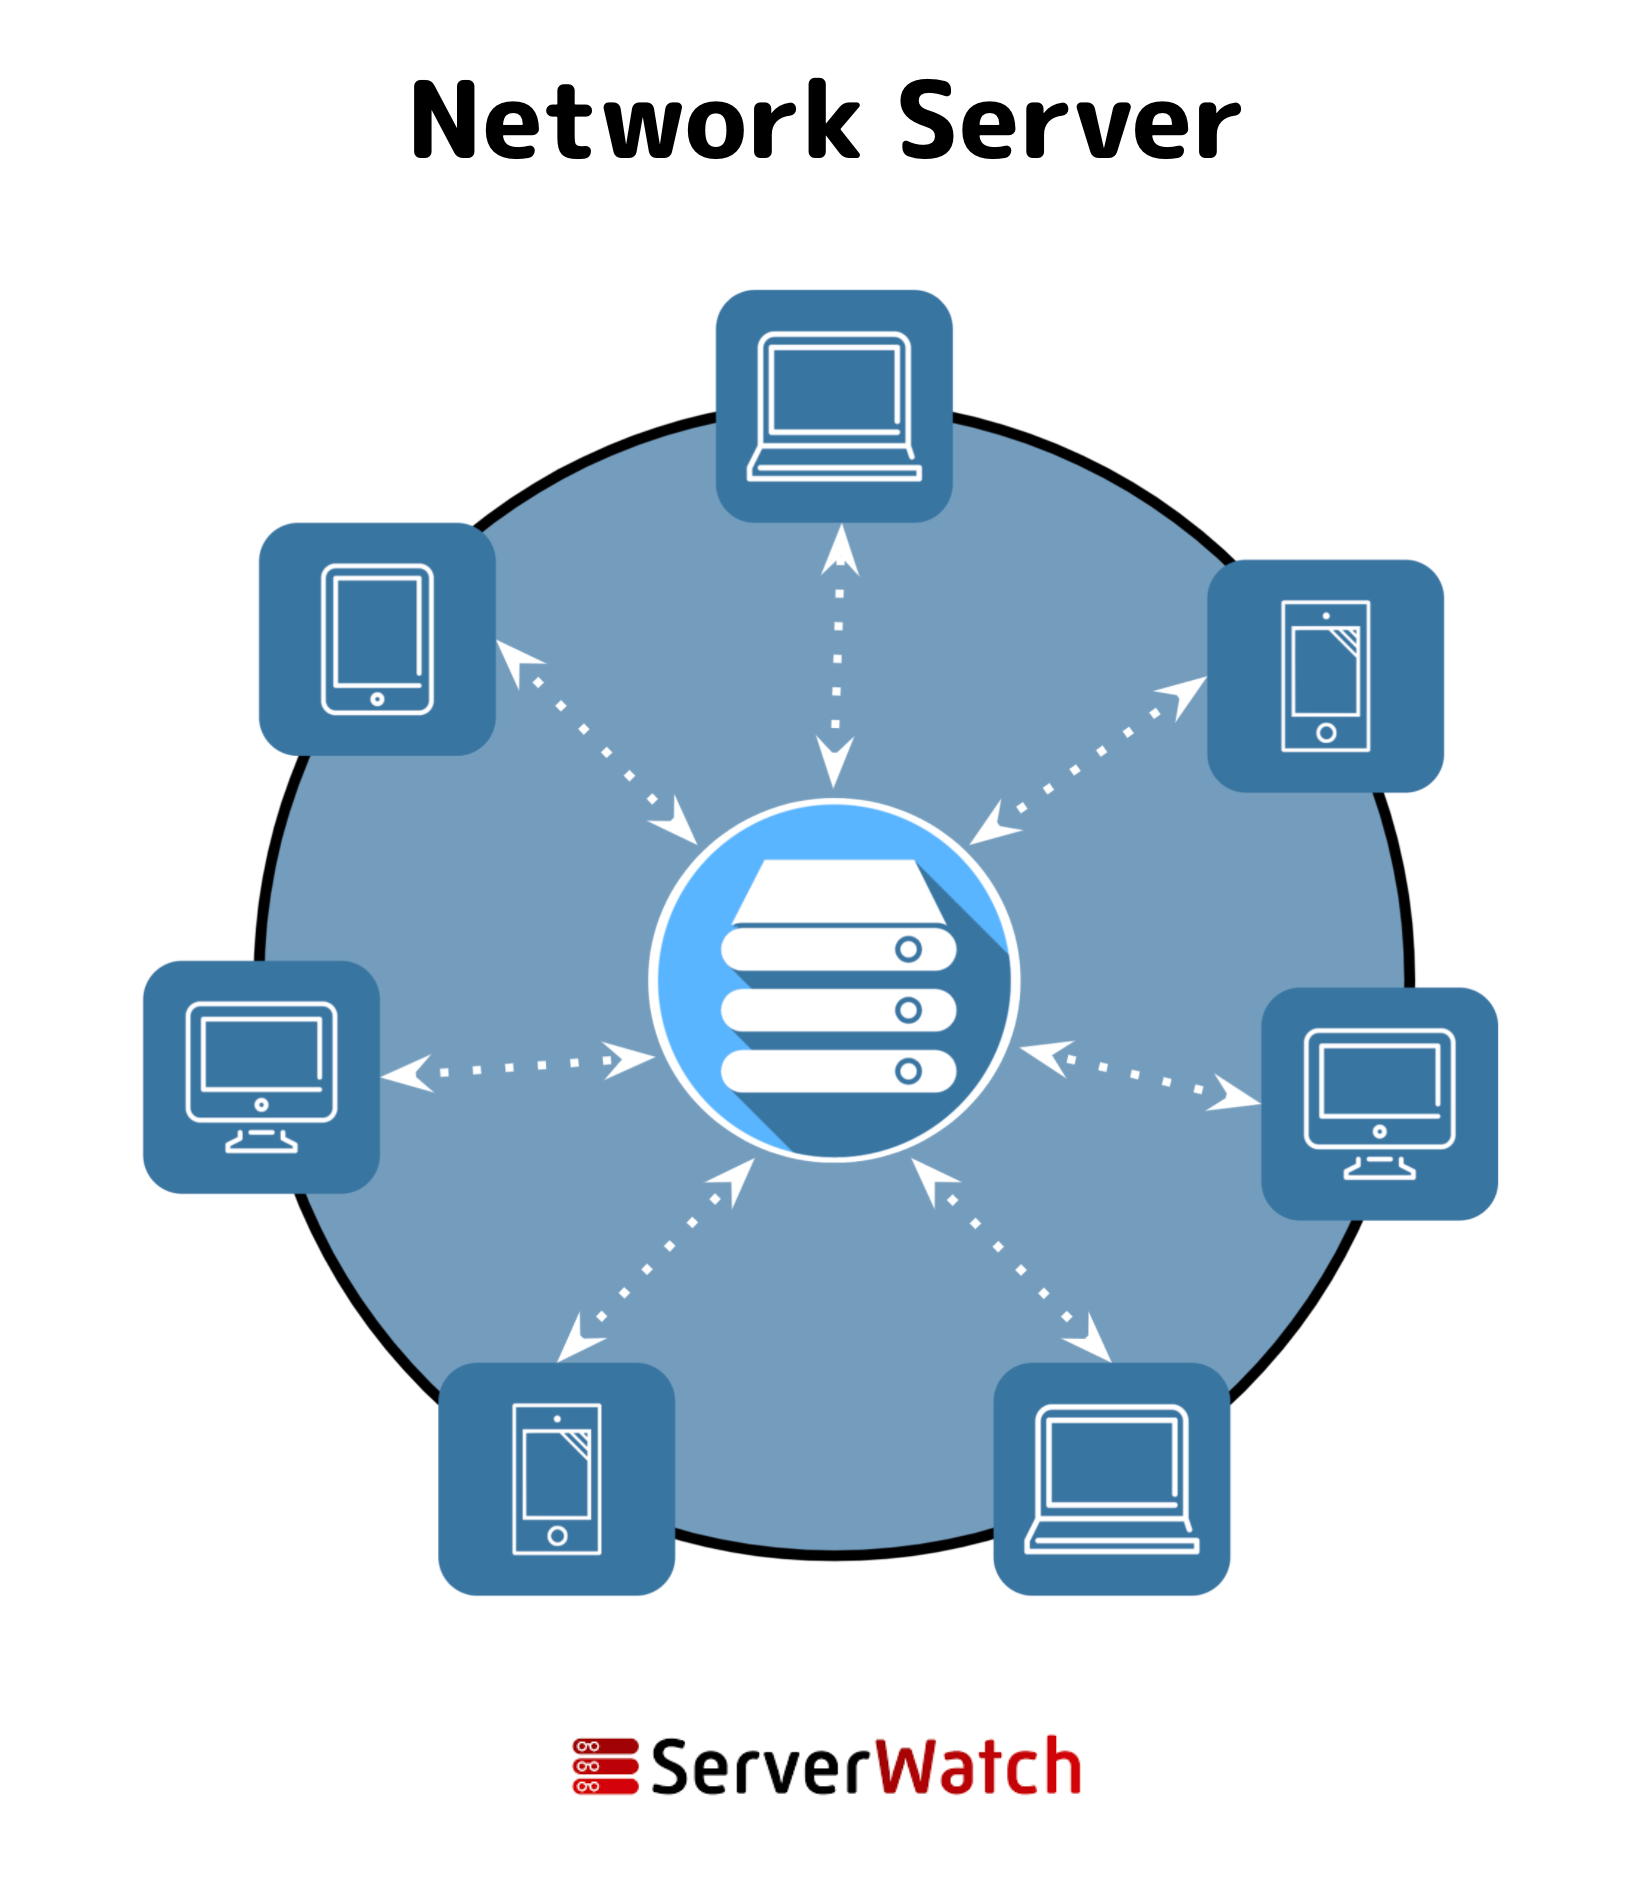 A graphic designed to show how a network server works with and provides resources to a network. Designed by Sam Ingalls.